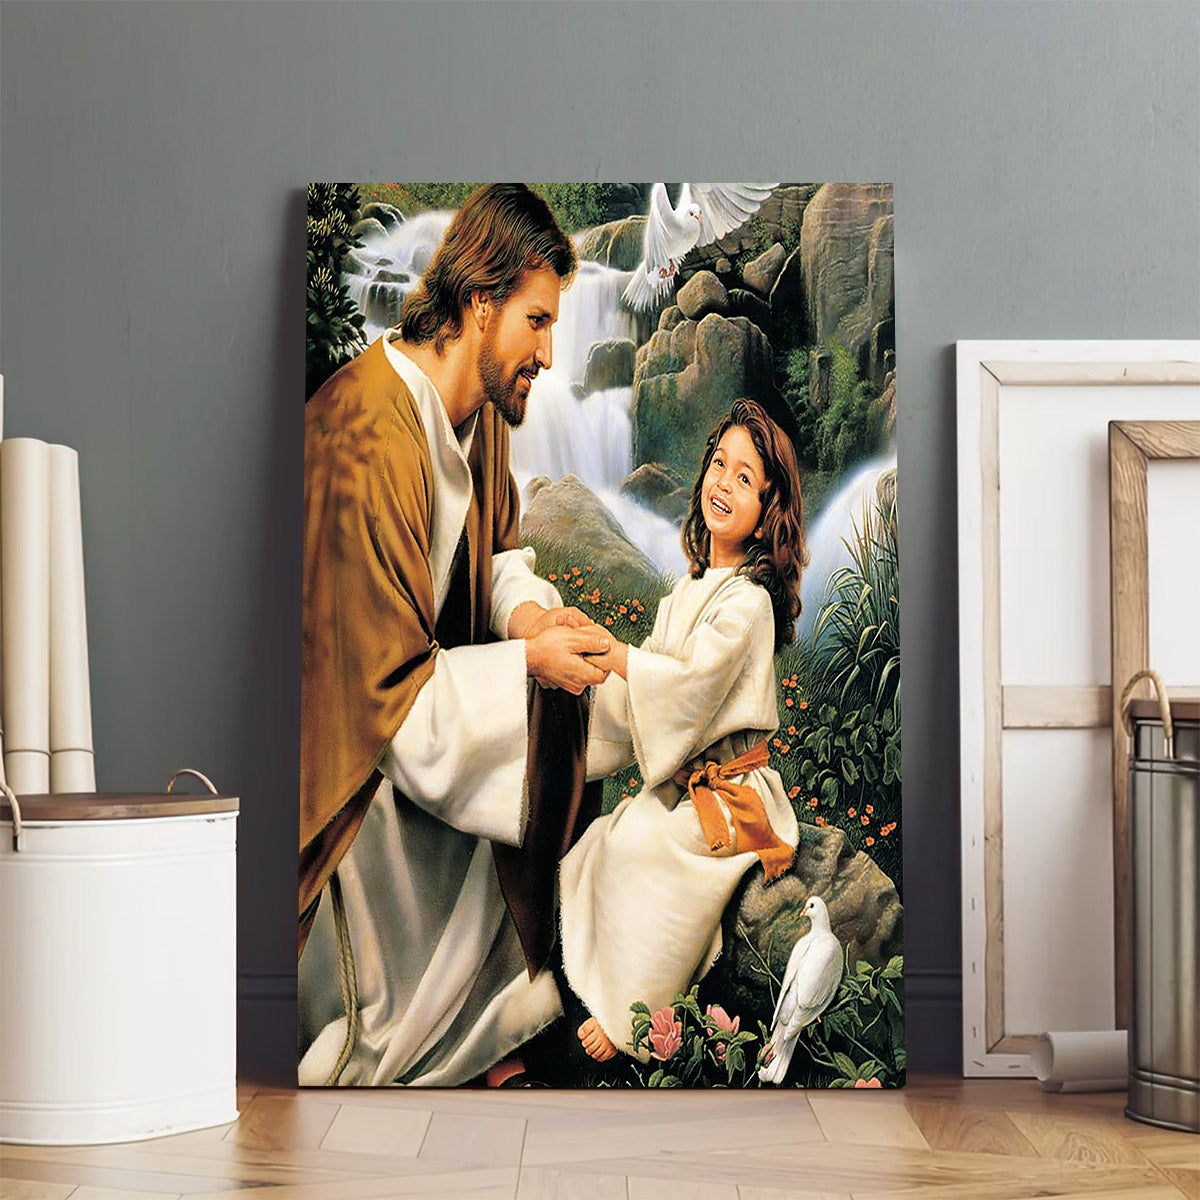 Jesus And Girl - Canvas Pictures - Jesus Canvas Art - Christian Wall Art